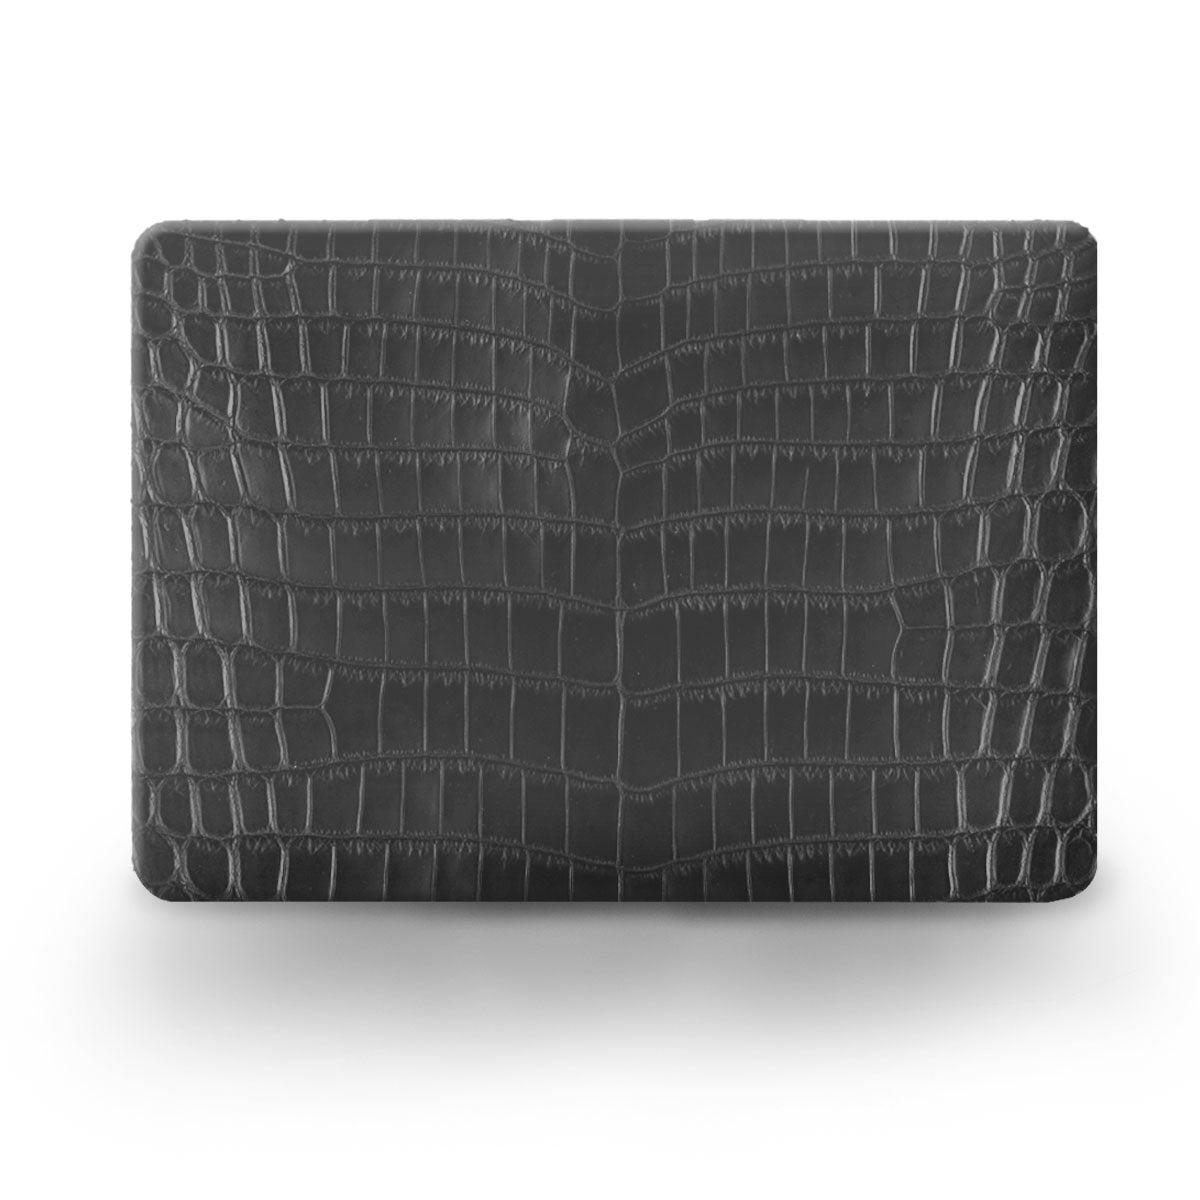 Leather Macbook case / back cover - Macbook Pro & Air (13, 14, 15 and 16 inches) - Genuine alligator